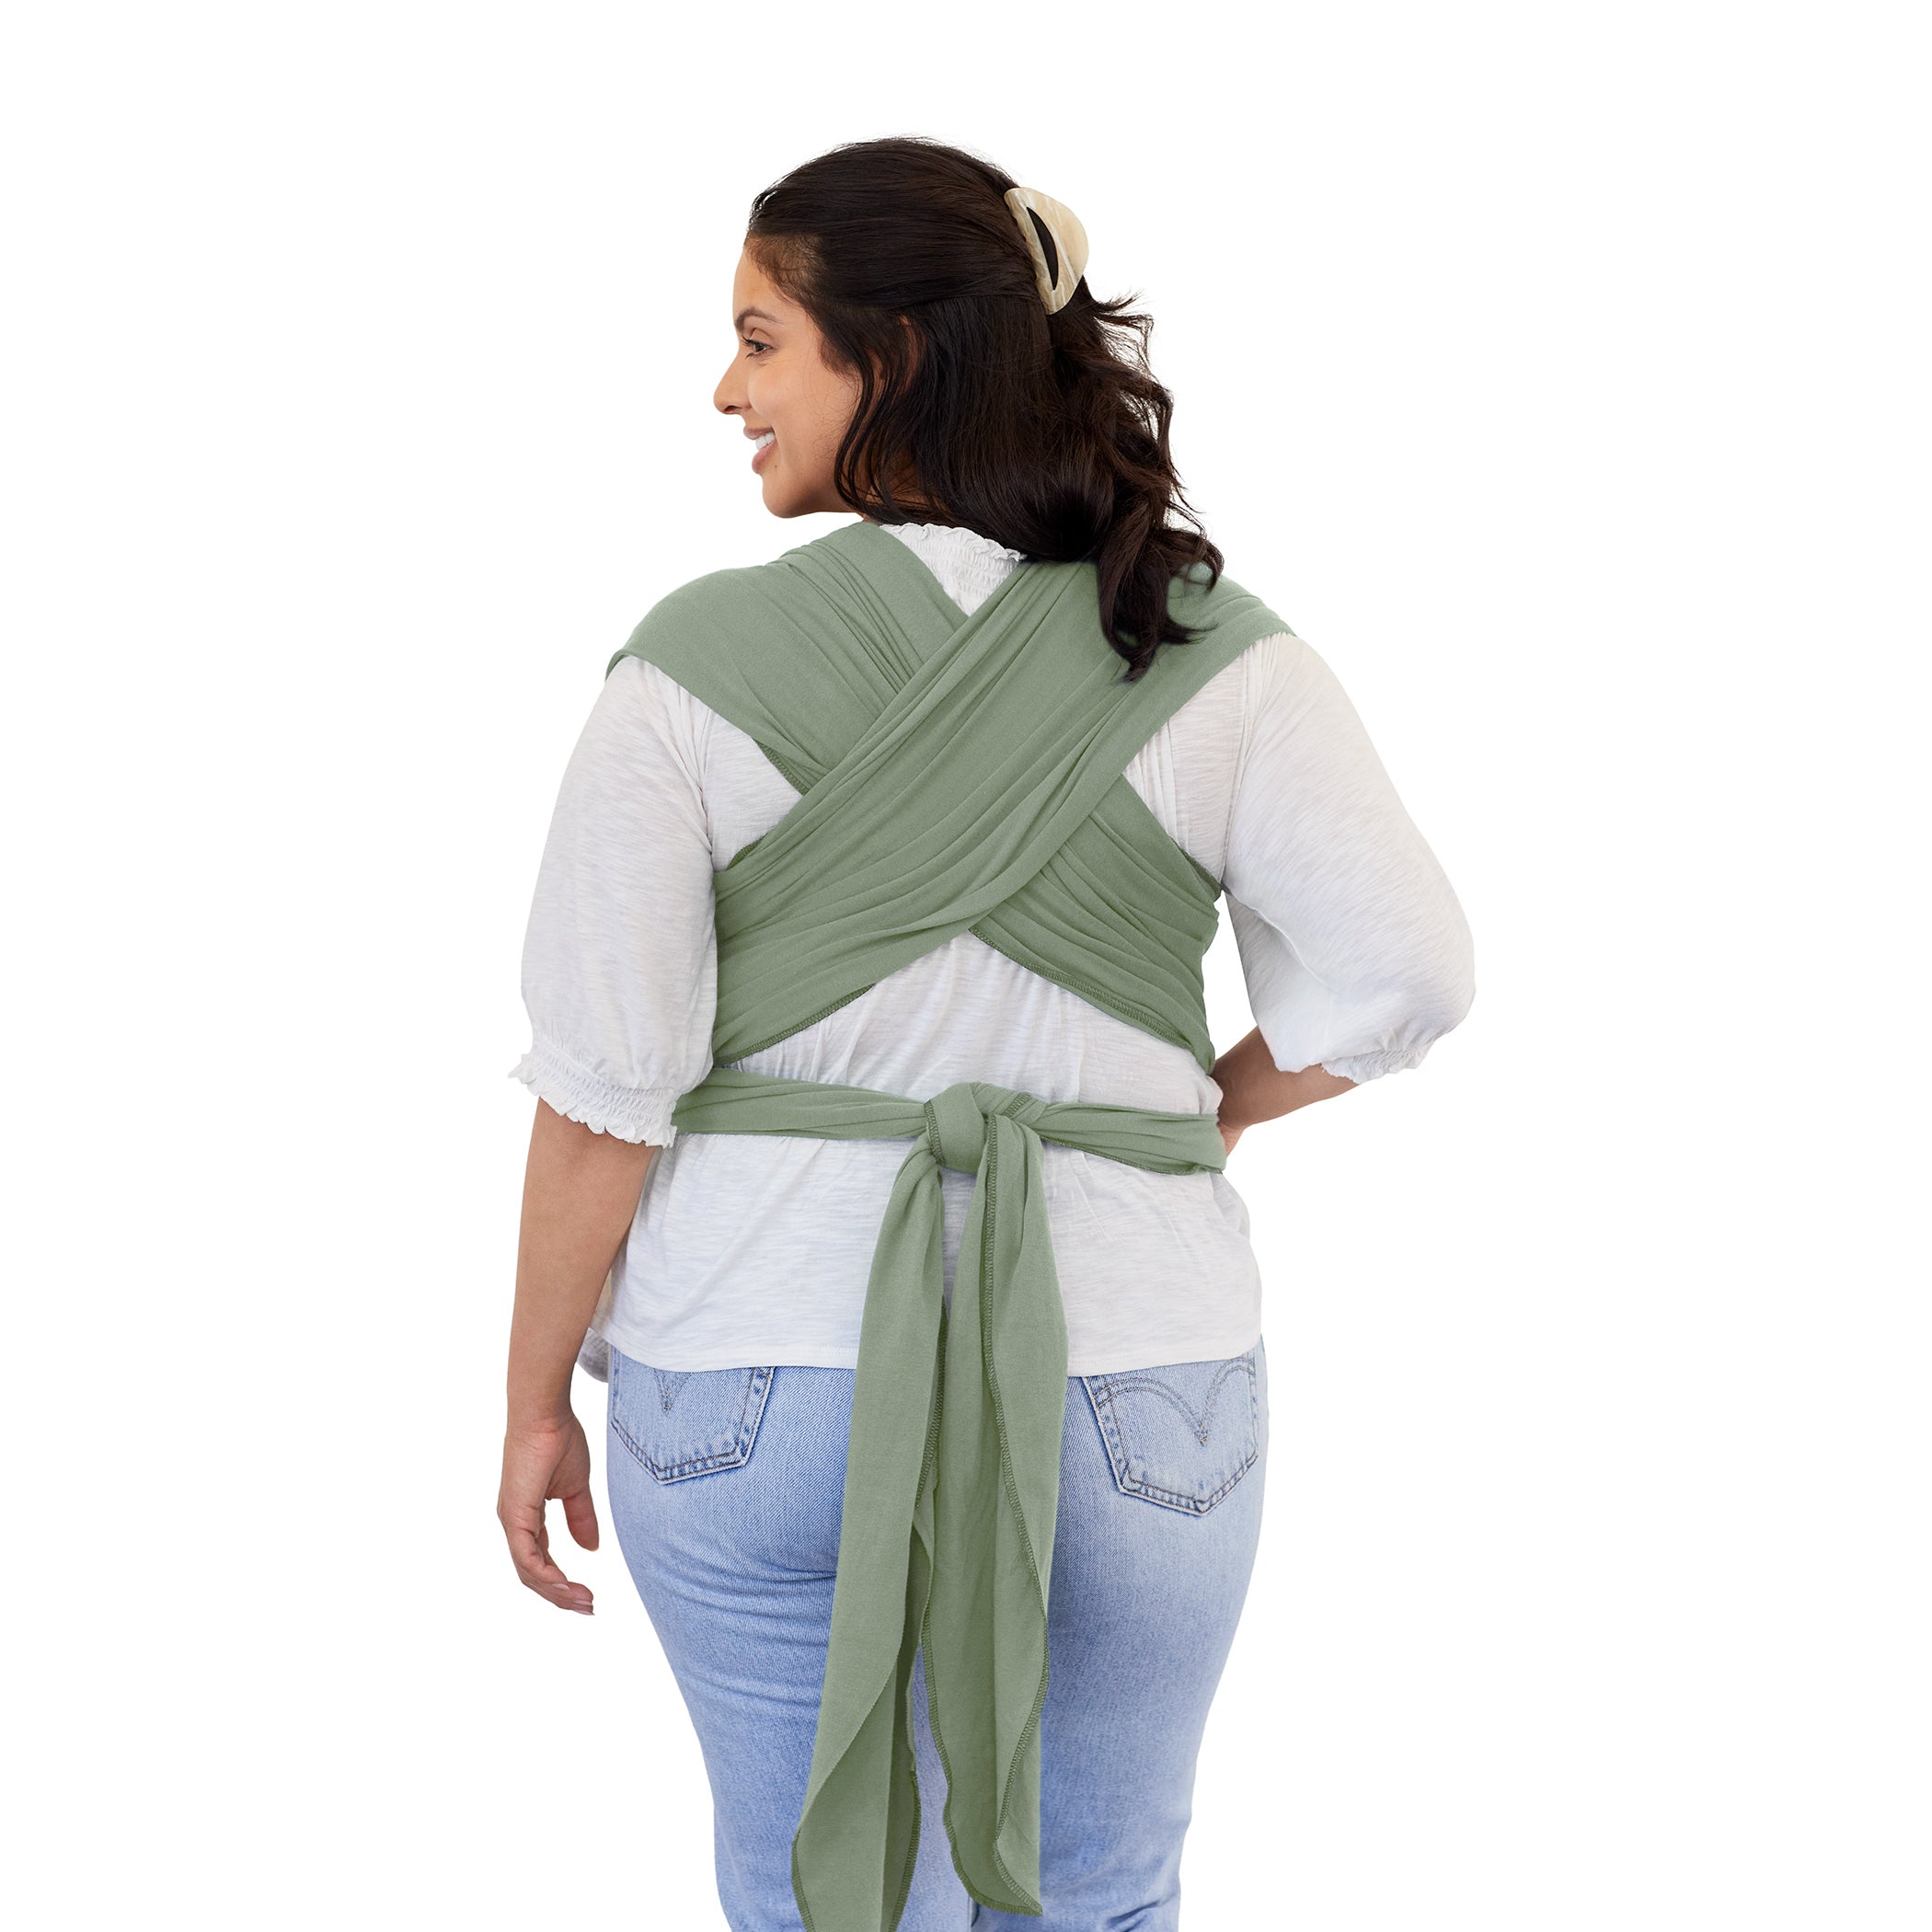 Classic Wrap Baby Carrier - Pear